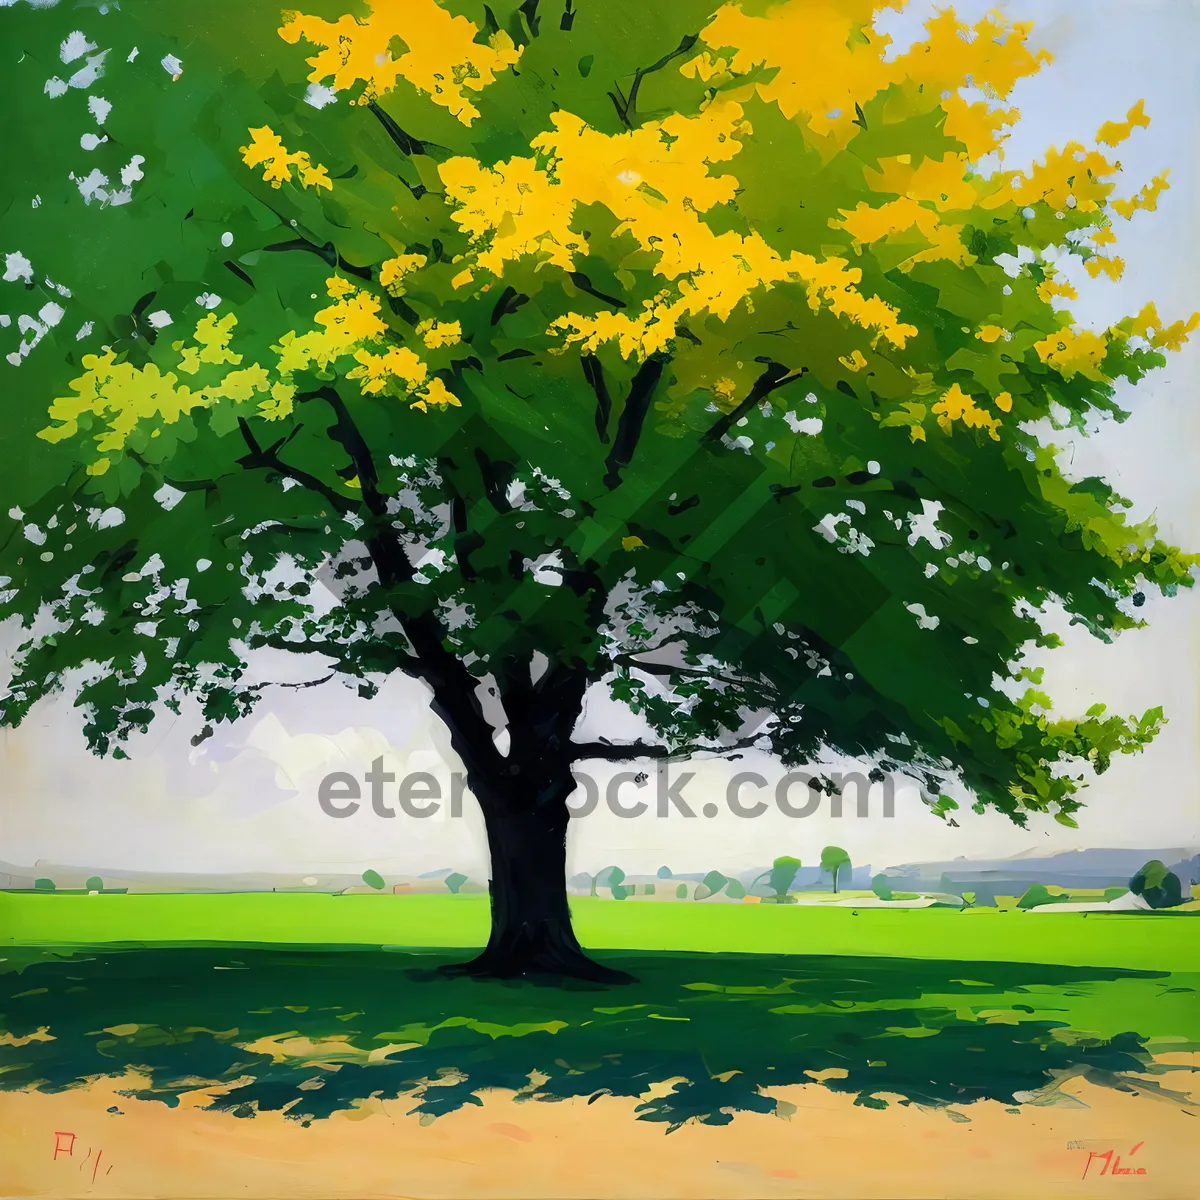 Picture of Autumn Maple Tree in Park Landscape